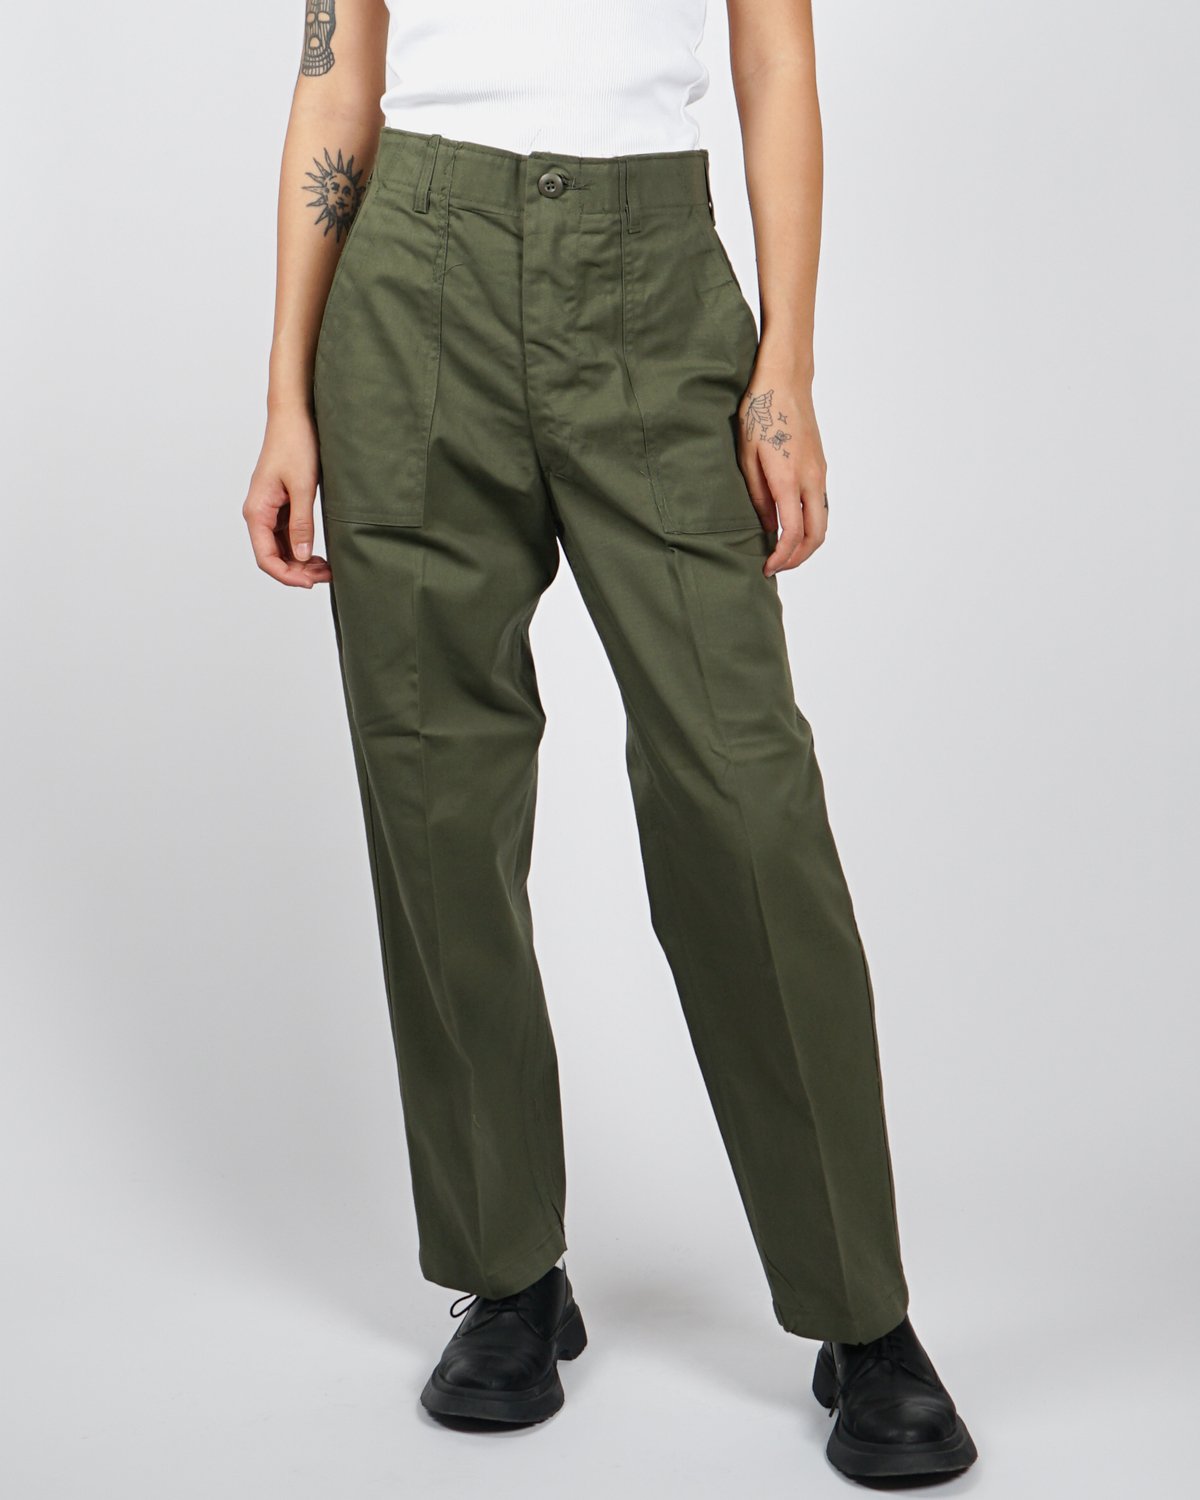 U.S. Military Utility Trousers – FRONT 11201